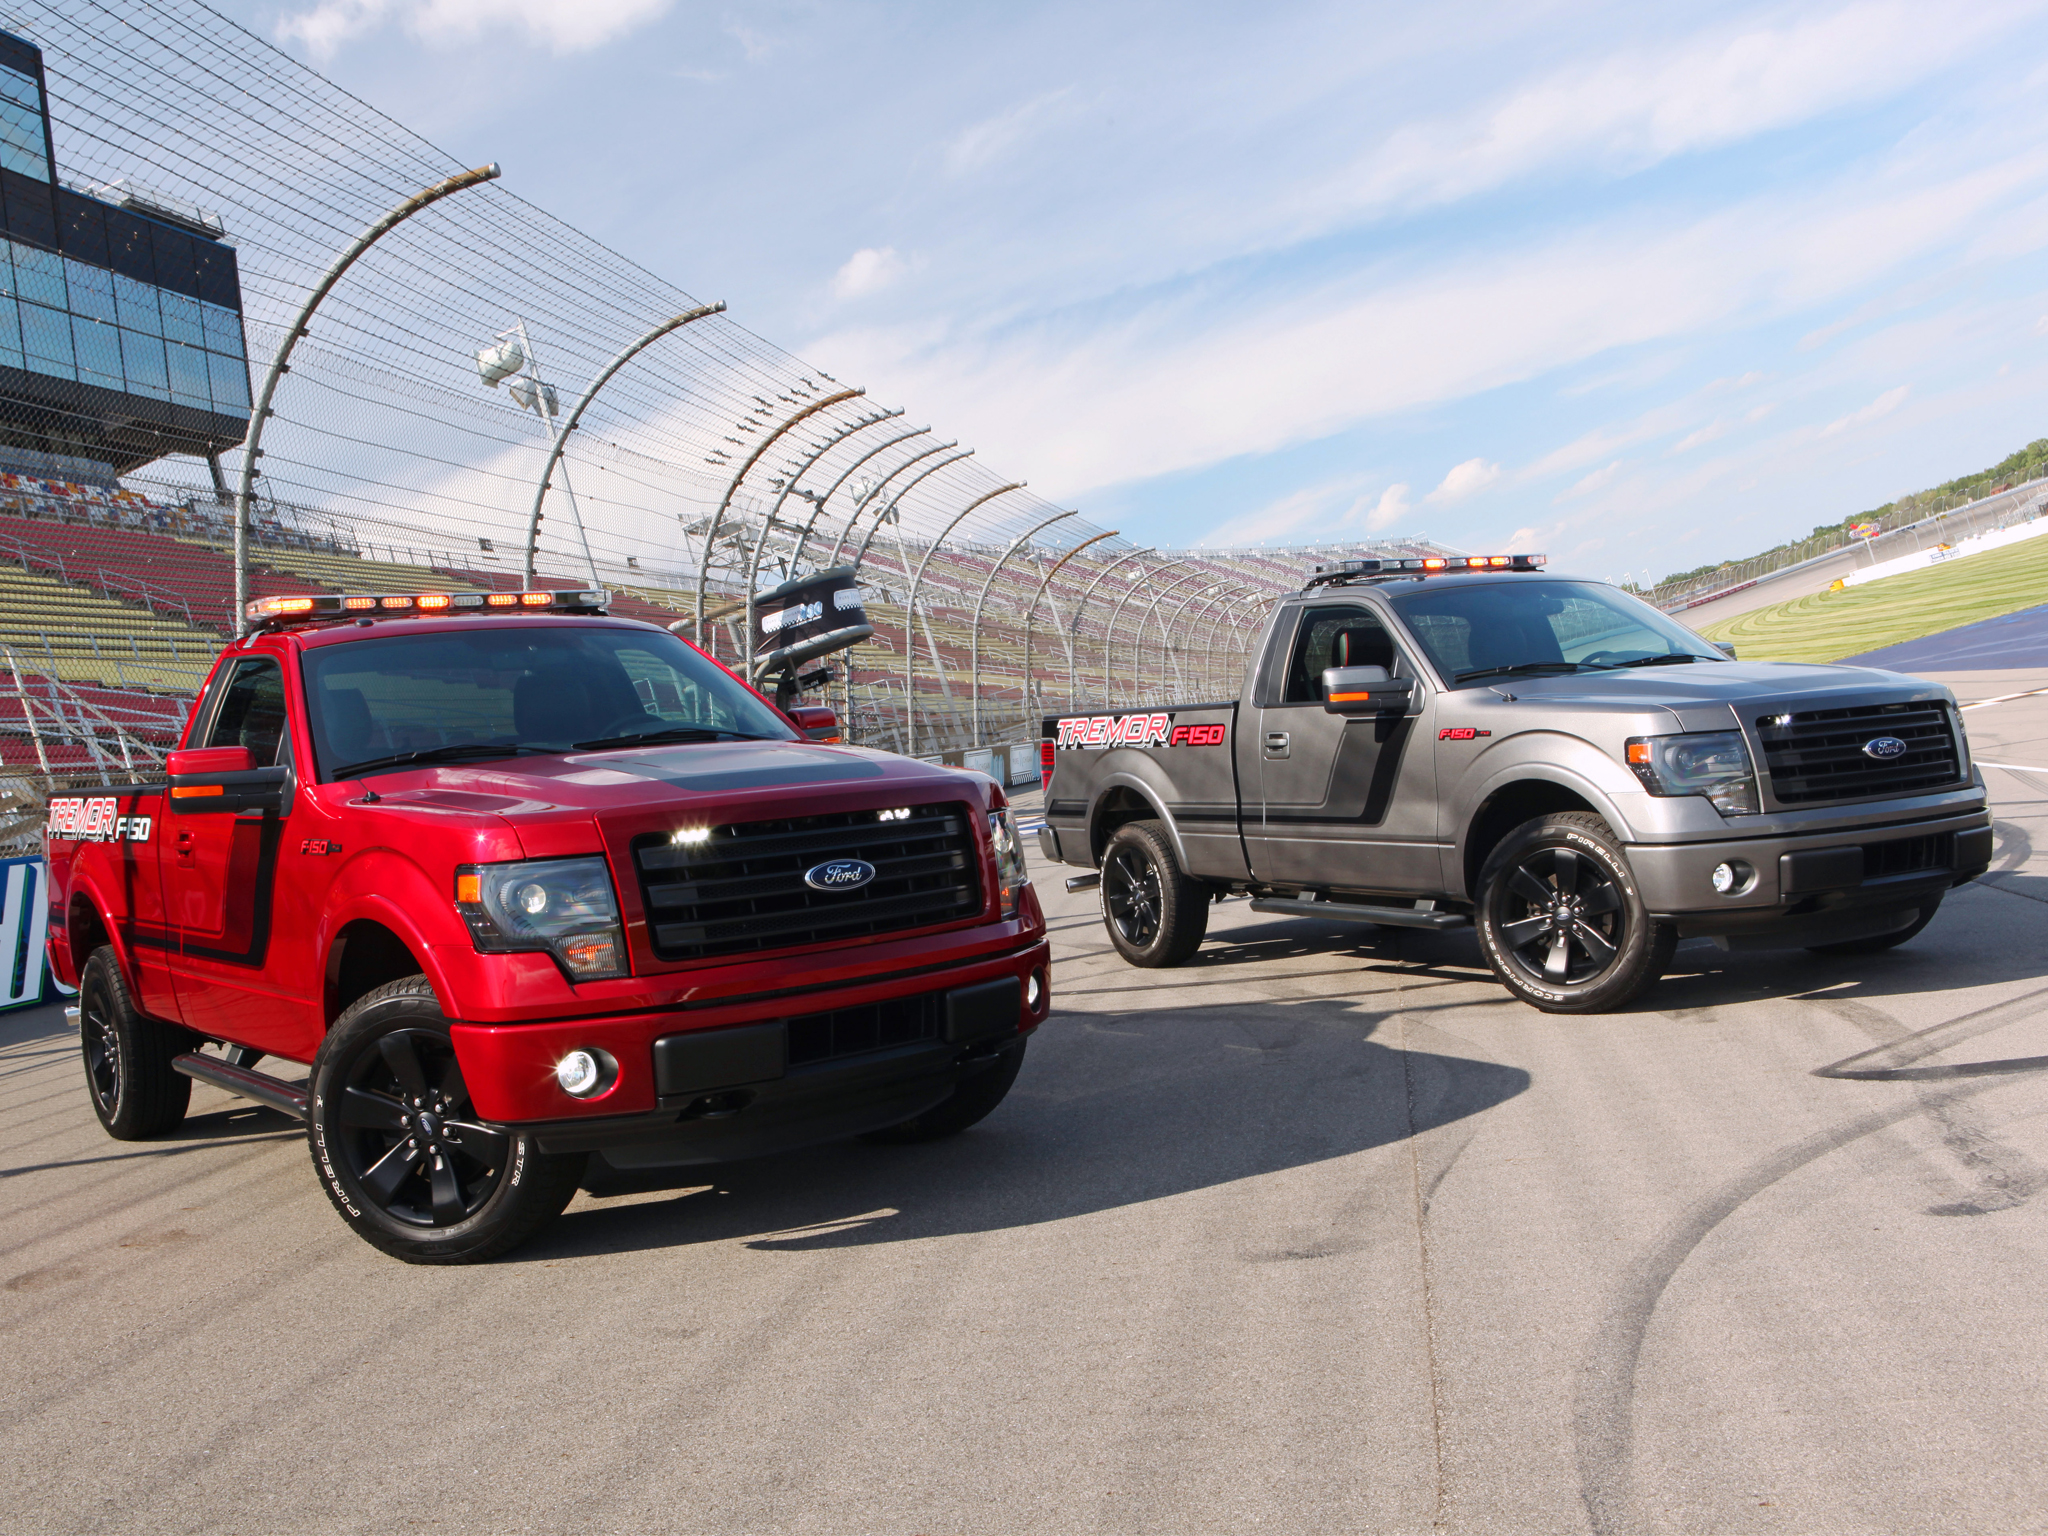 2014, Ford, F 150, Tremor, Ecoboost, Nascar, Pace, Truck, Pickup, Race, Racing, Muscle Wallpaper